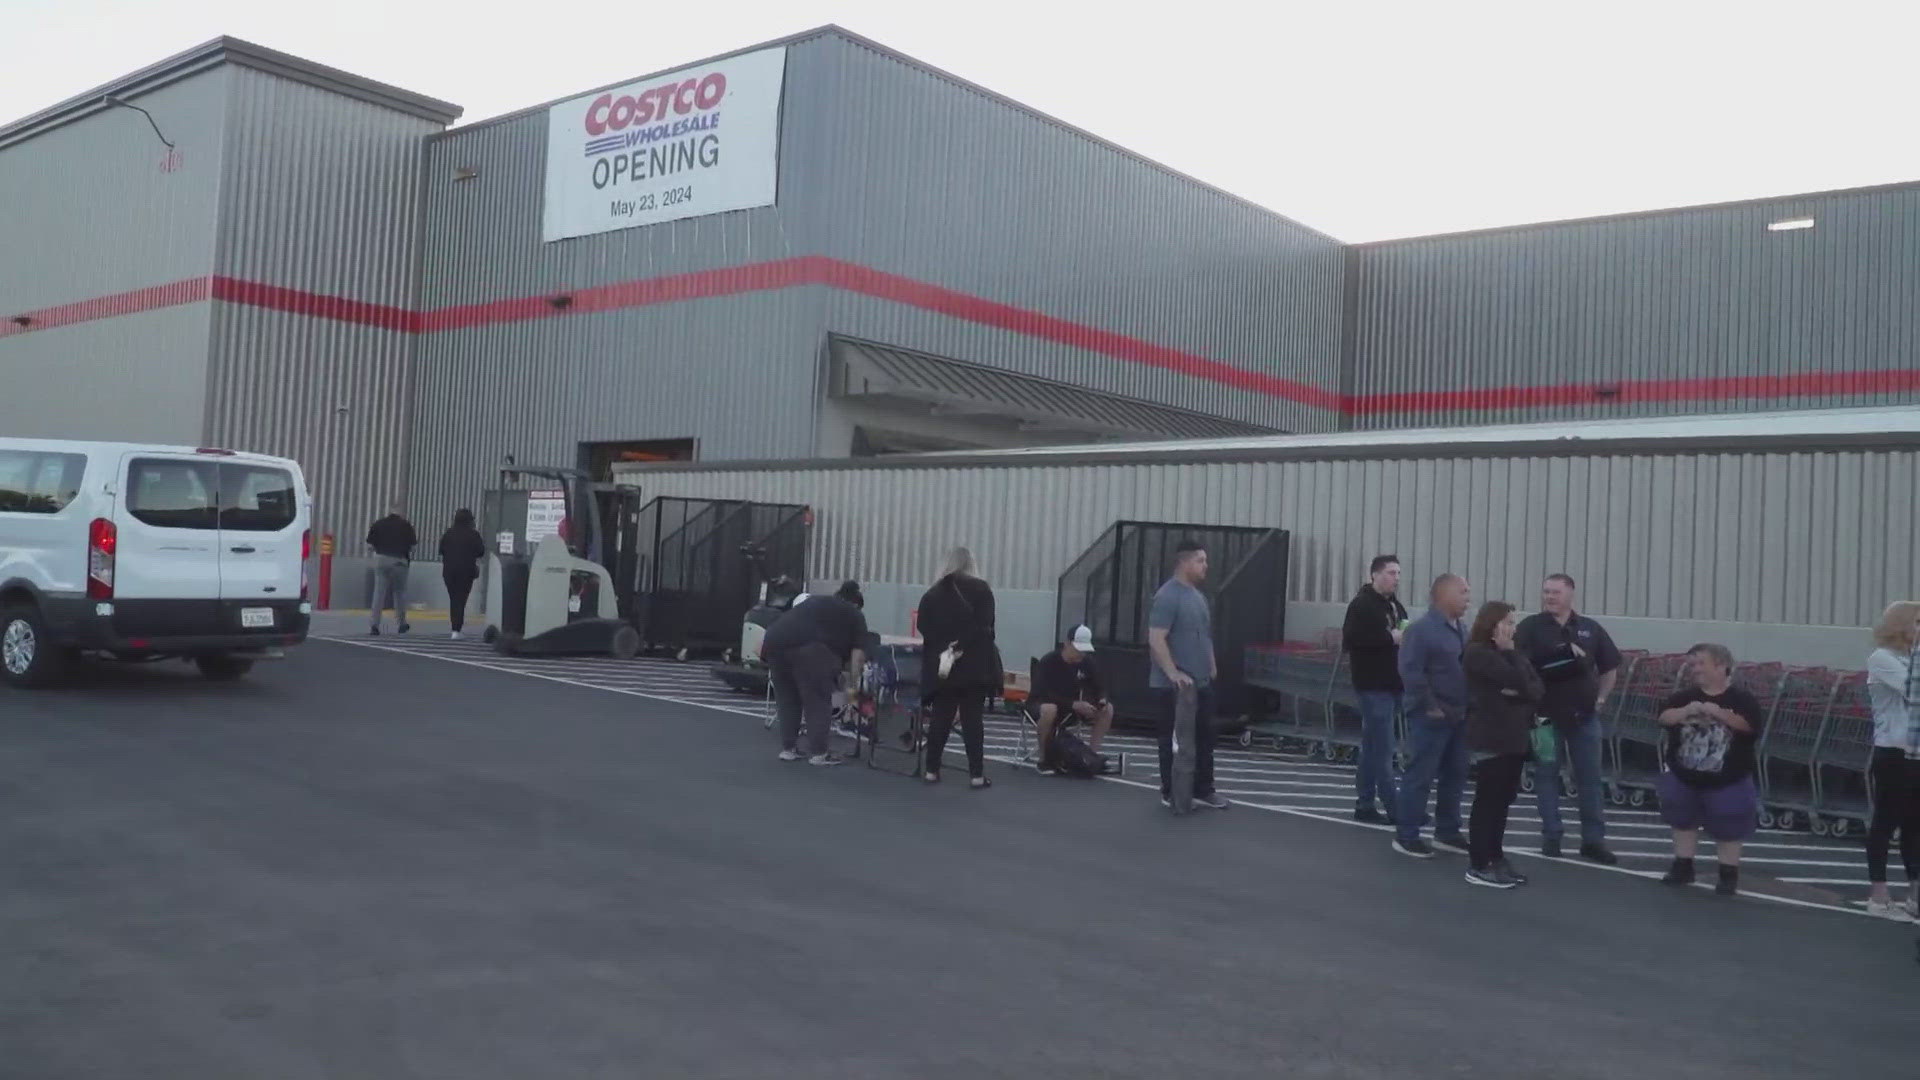 A new Costco is opening in Placer County. The long-awaited location in Loomis has long lines with excited shoppers ahead of the opening.